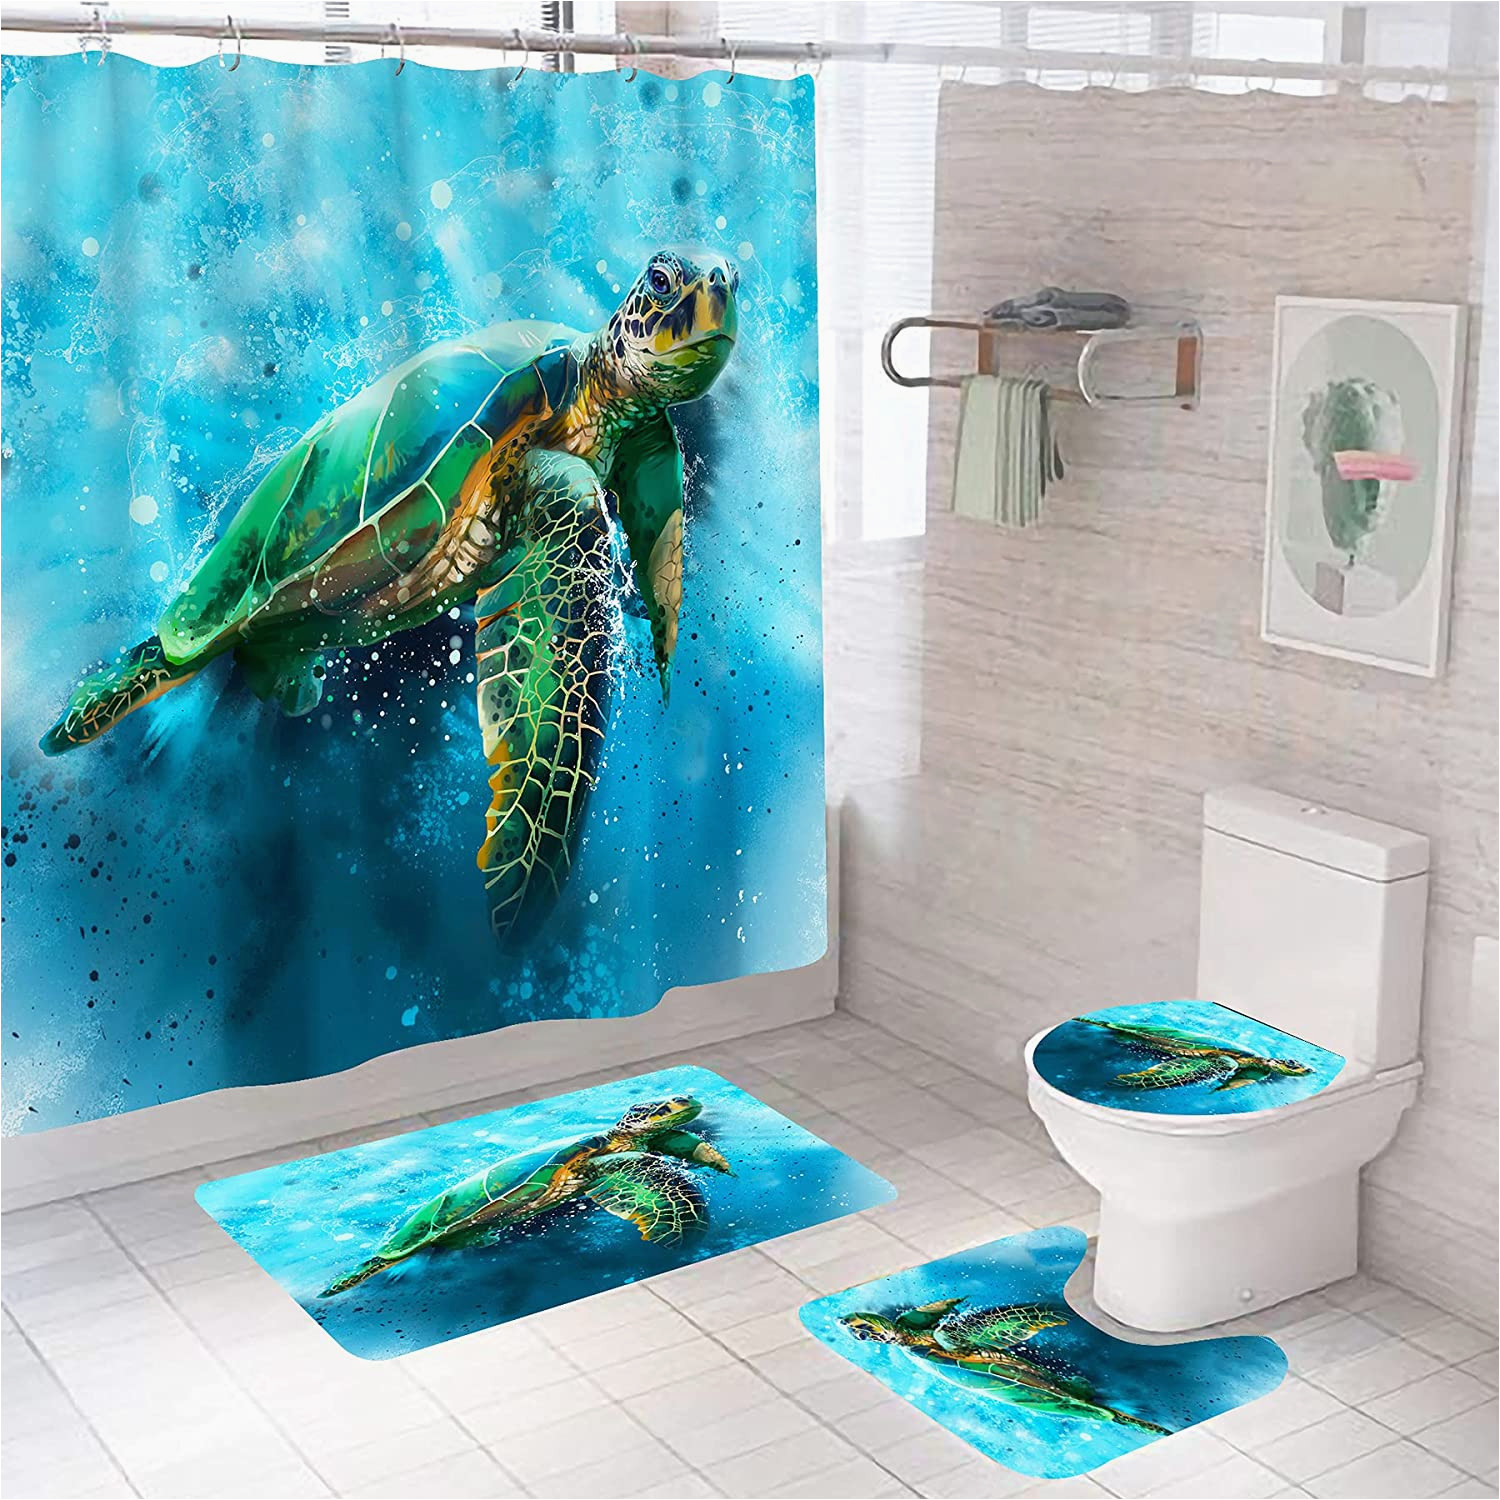 Sea Turtle Bath Rug Sea Turtle Bathroom Sets with Shower Curtain and Rugs and Accessories, Ocean Nautical Shower Curtain with 12 Hooks, Durable Waterproof Fabric Shower …